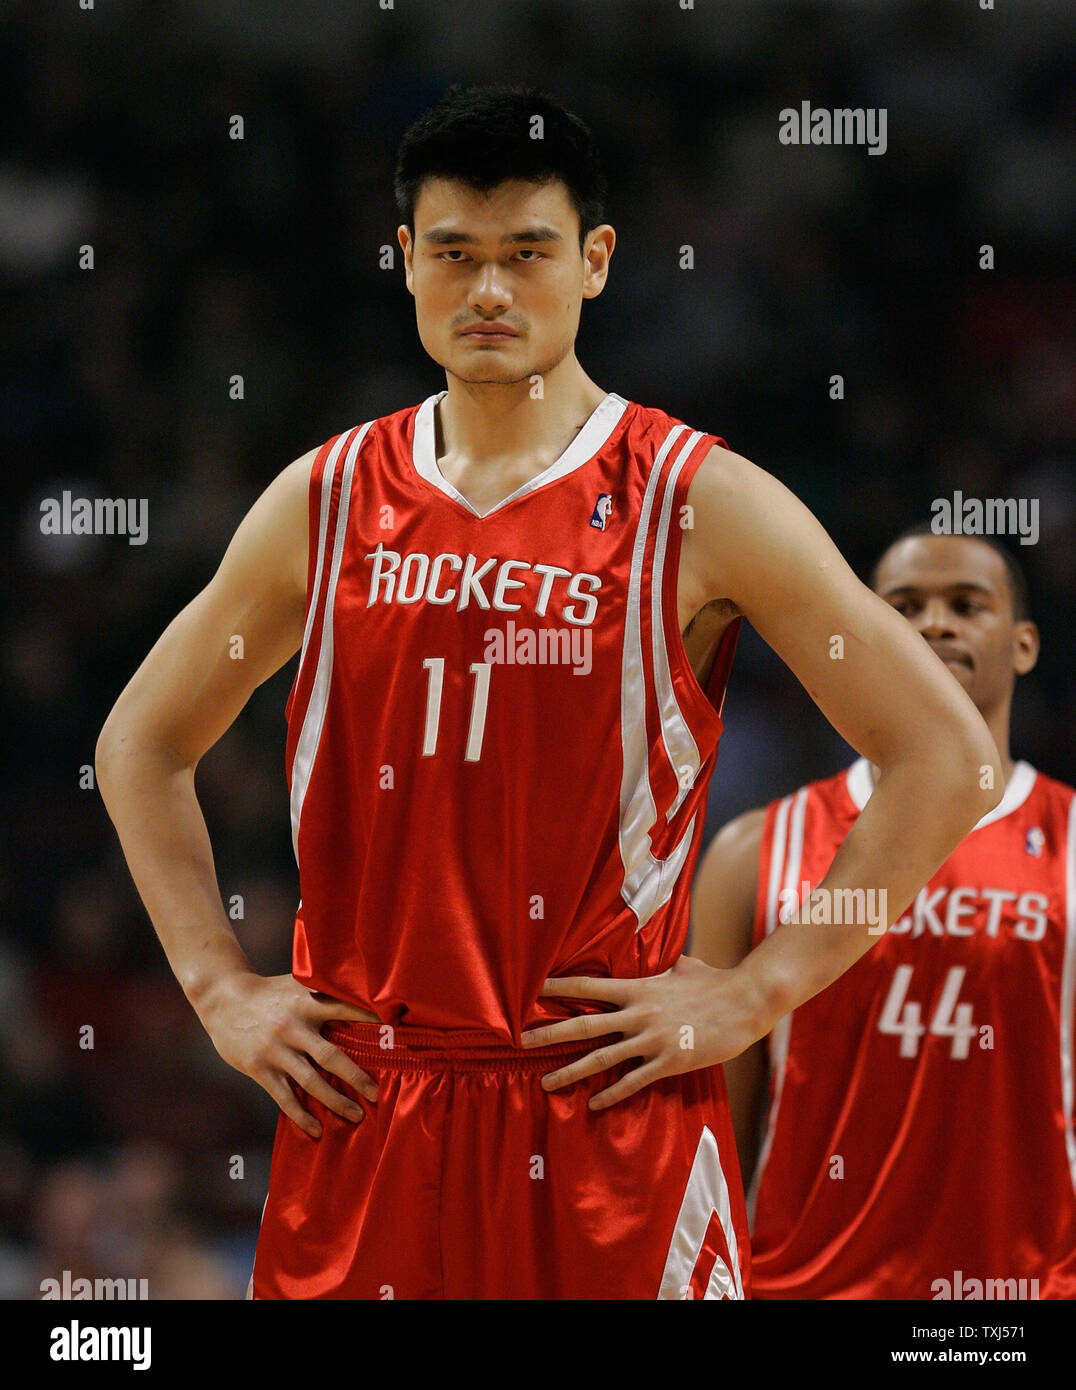 Houston Rockets' Yao Ming (11) of China waits for the opening tip against  the Chicago Bulls in Chicago on December 22, 2007. (UPI Photo/Brian Kersey  Stock Photo - Alamy